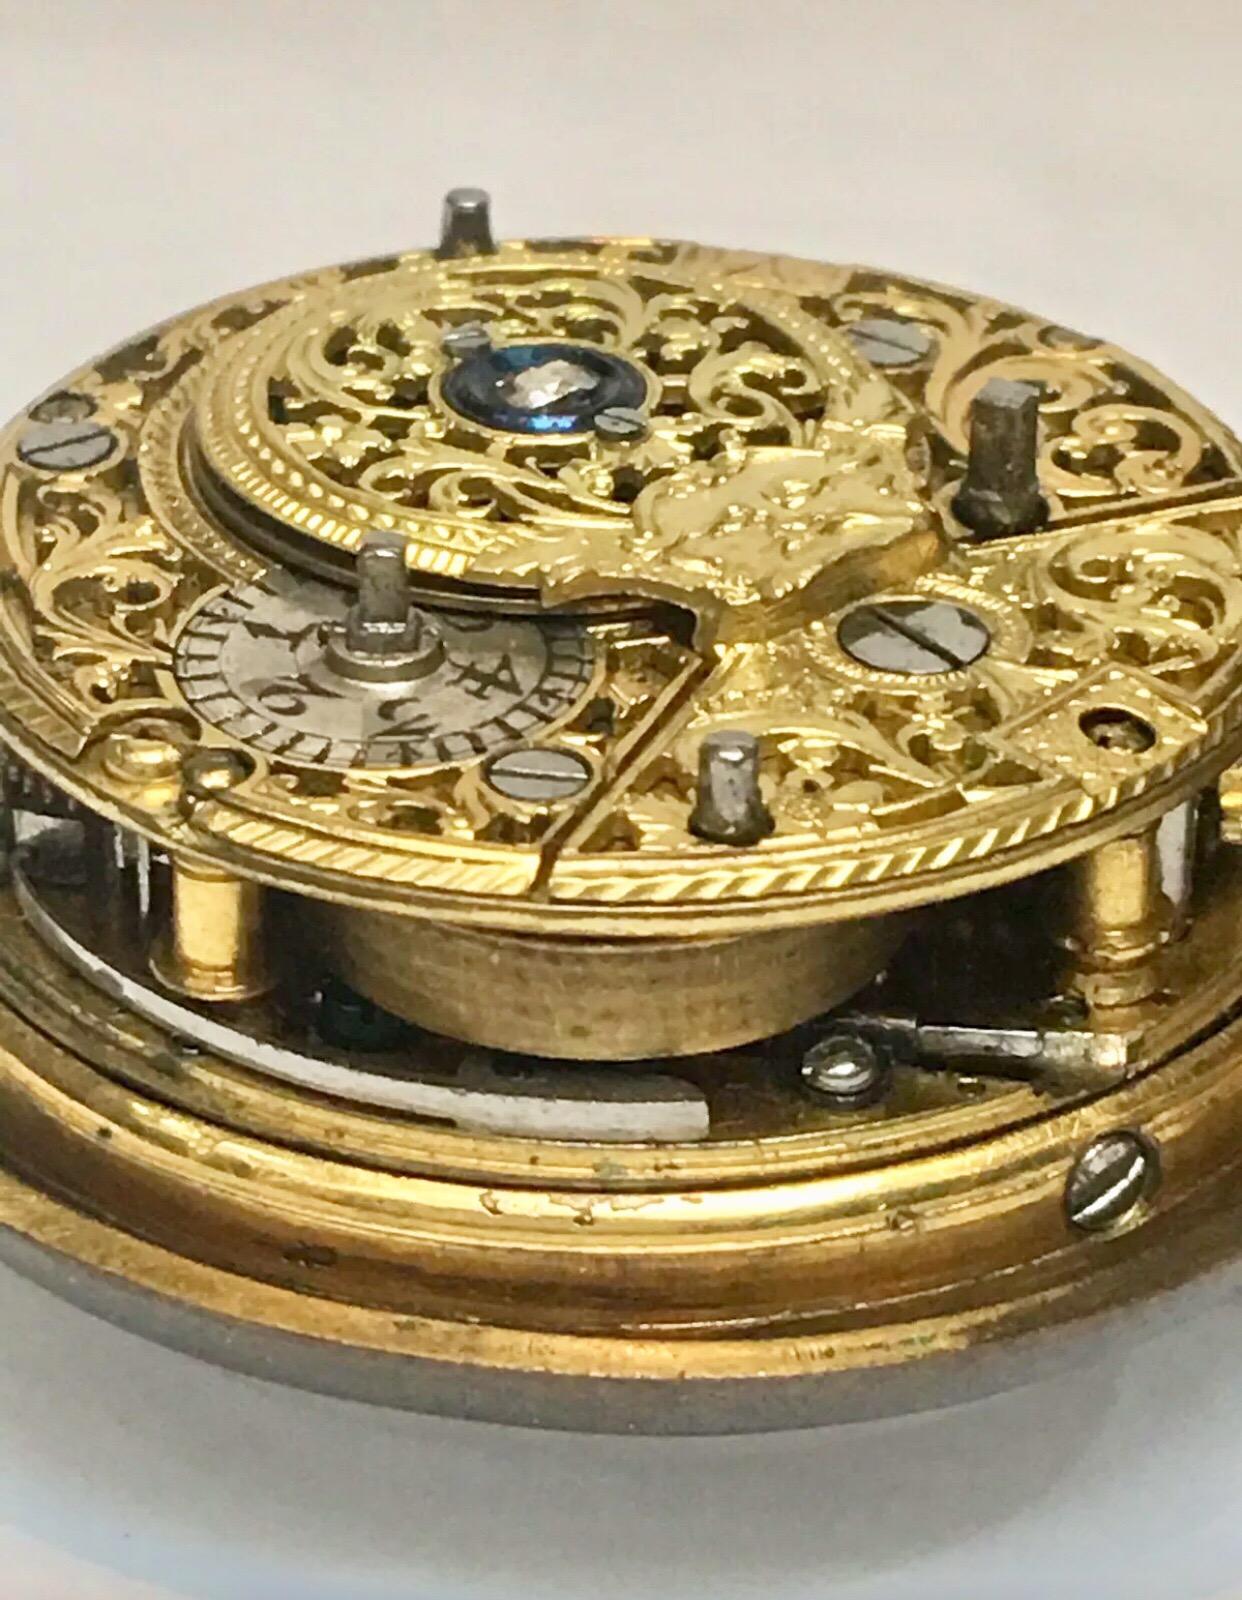 Rare “Dumb” Quarter Repeating Repousse Verge Fusee Pocket Watch by Hubert London For Sale 5